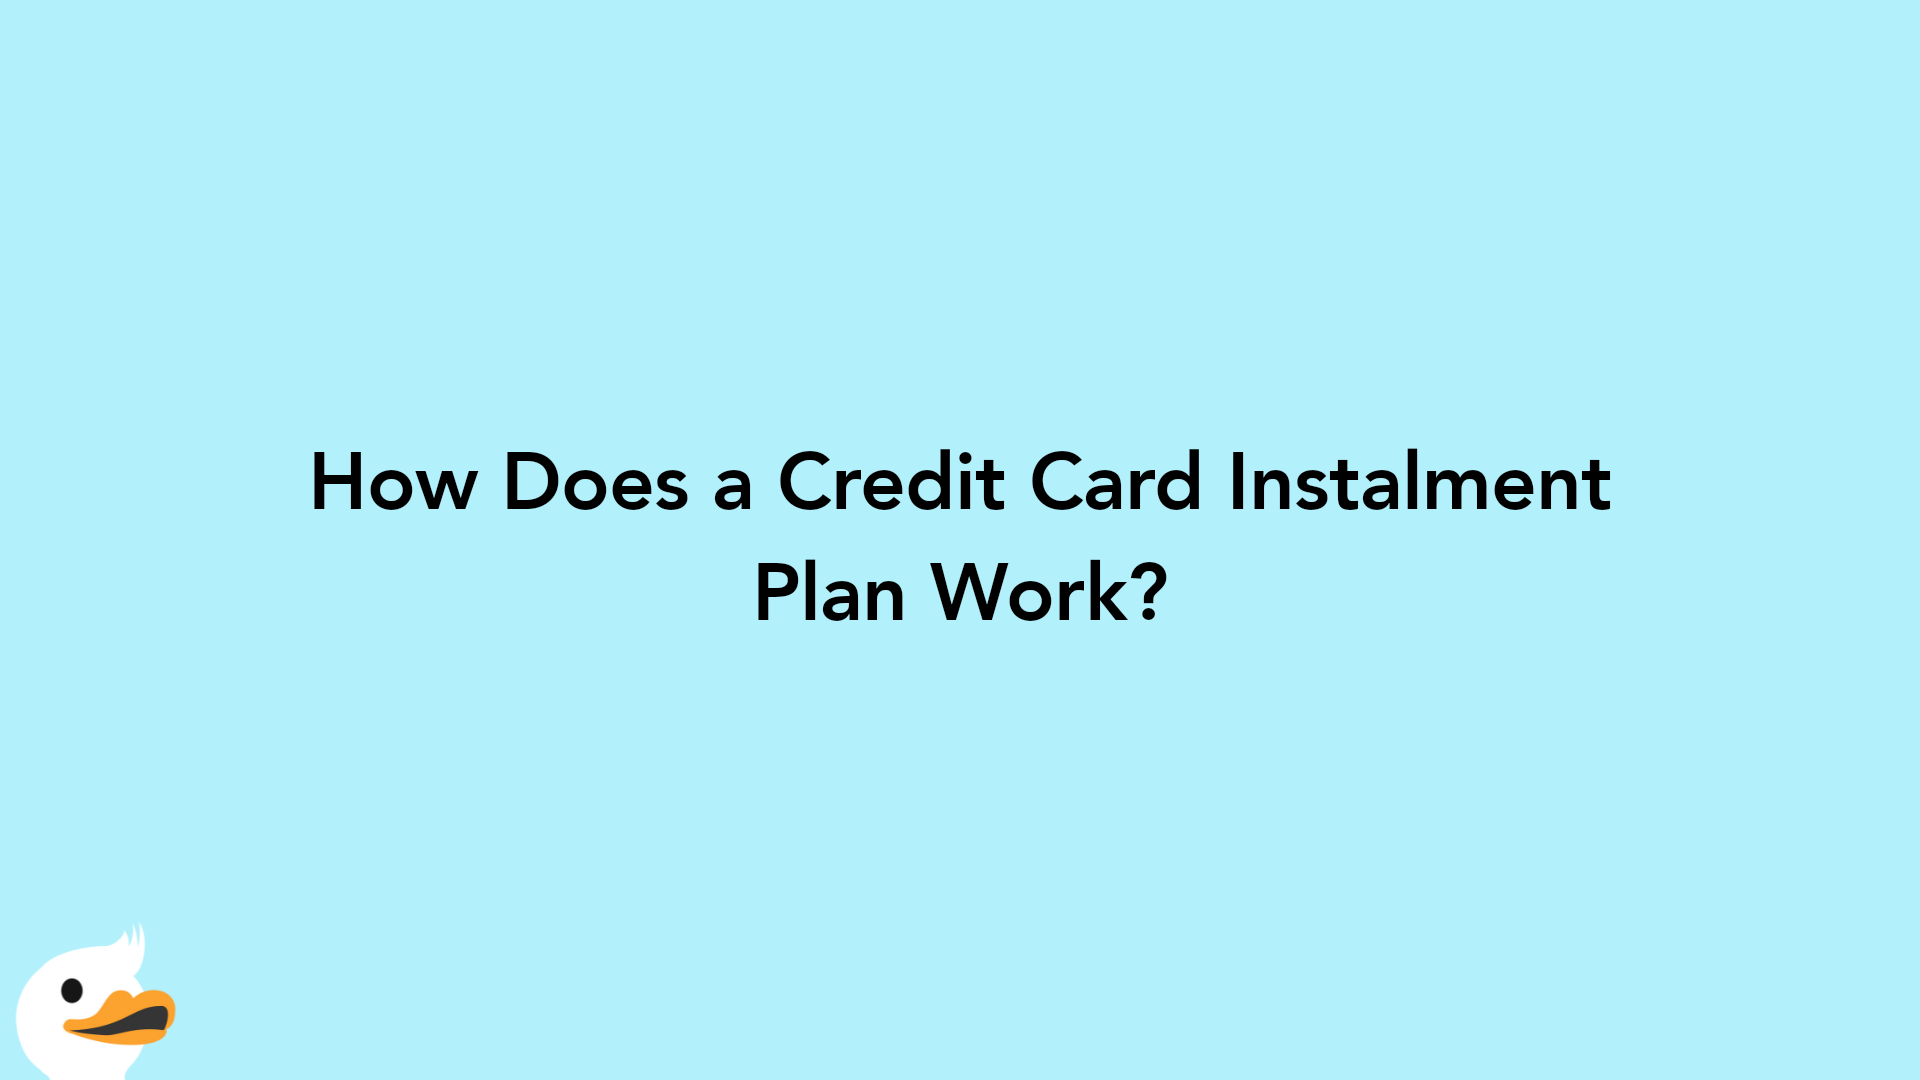 How Does a Credit Card Instalment Plan Work?